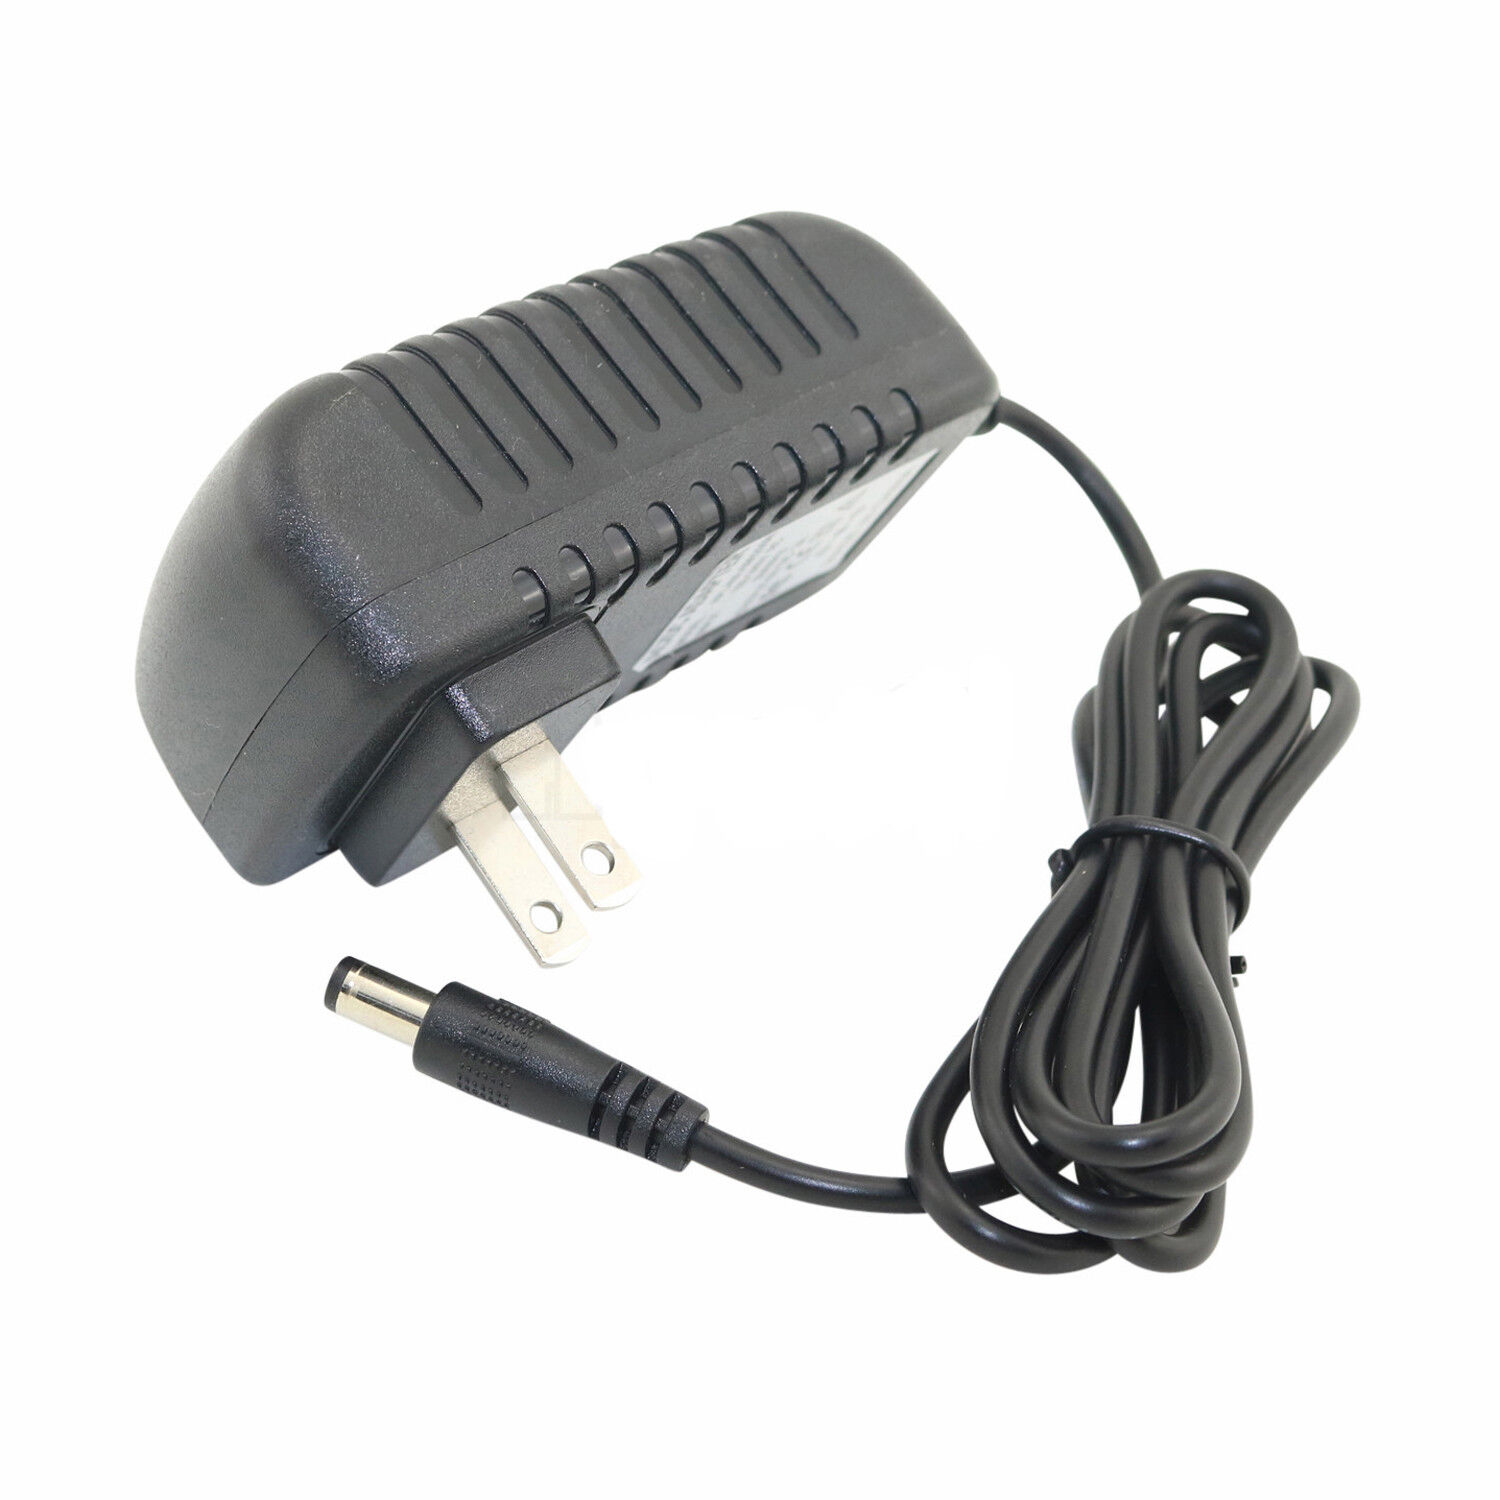 Replacement 27V AC DC Adapter for Sharper Image 2437599 1013002 1012667 1011666 1013983 1014747 1013985 Powerboost Deep